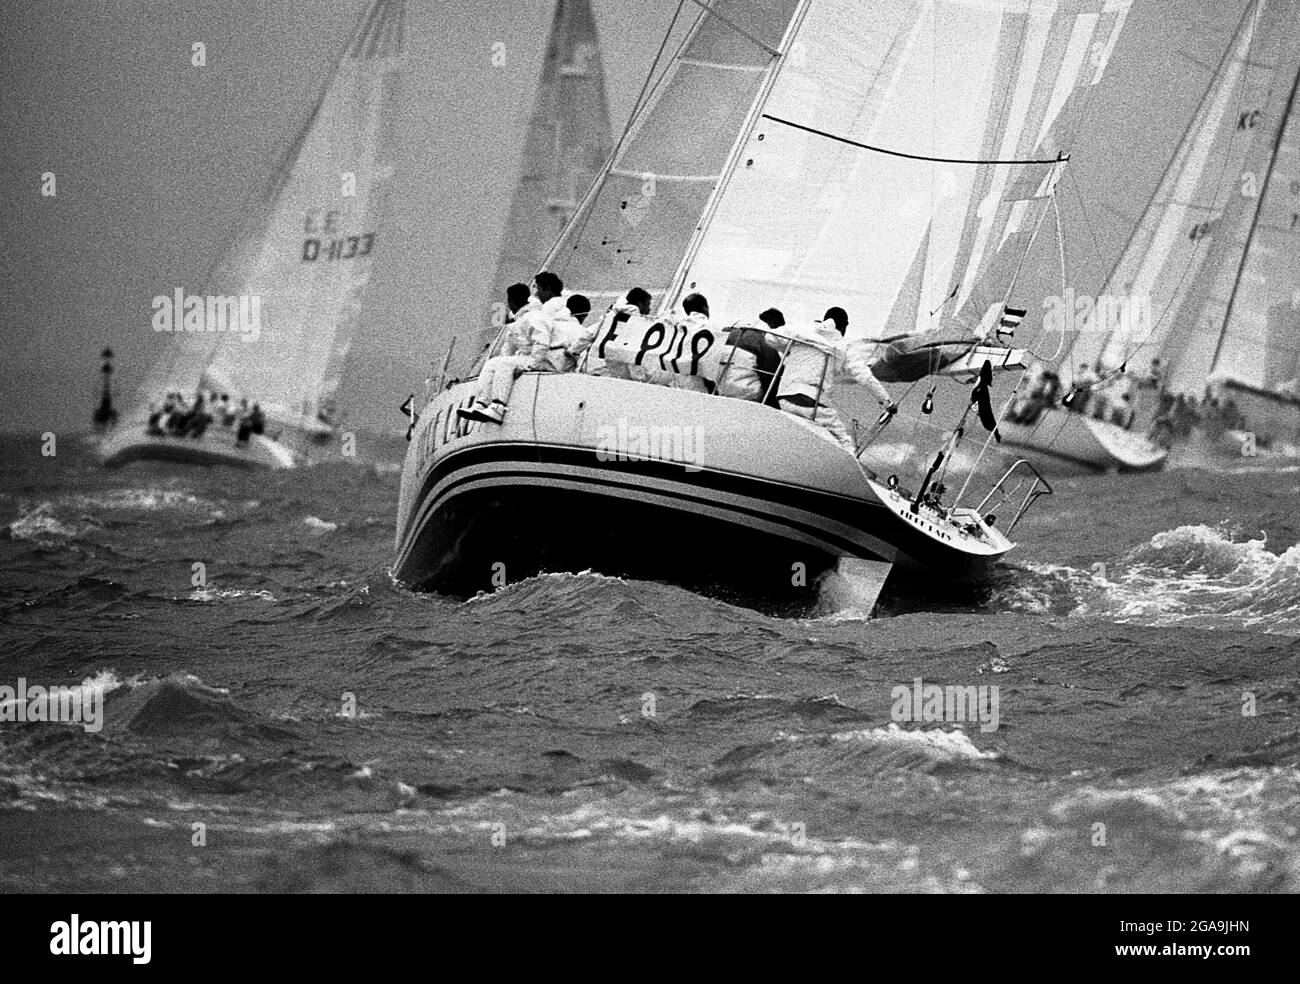 AJAXNETPHOTO. 1985. SOLENT, ENGLAND. - CHANNEL RACE START - FRENCH ADMIRAL'S CUP TEAM YACHT FIERE LADY IN ROUGH WEATHER AT THE START. PHOTO:JONATHAN EASTLAND/AJAX REF:CHR85_10A_17 Stock Photo